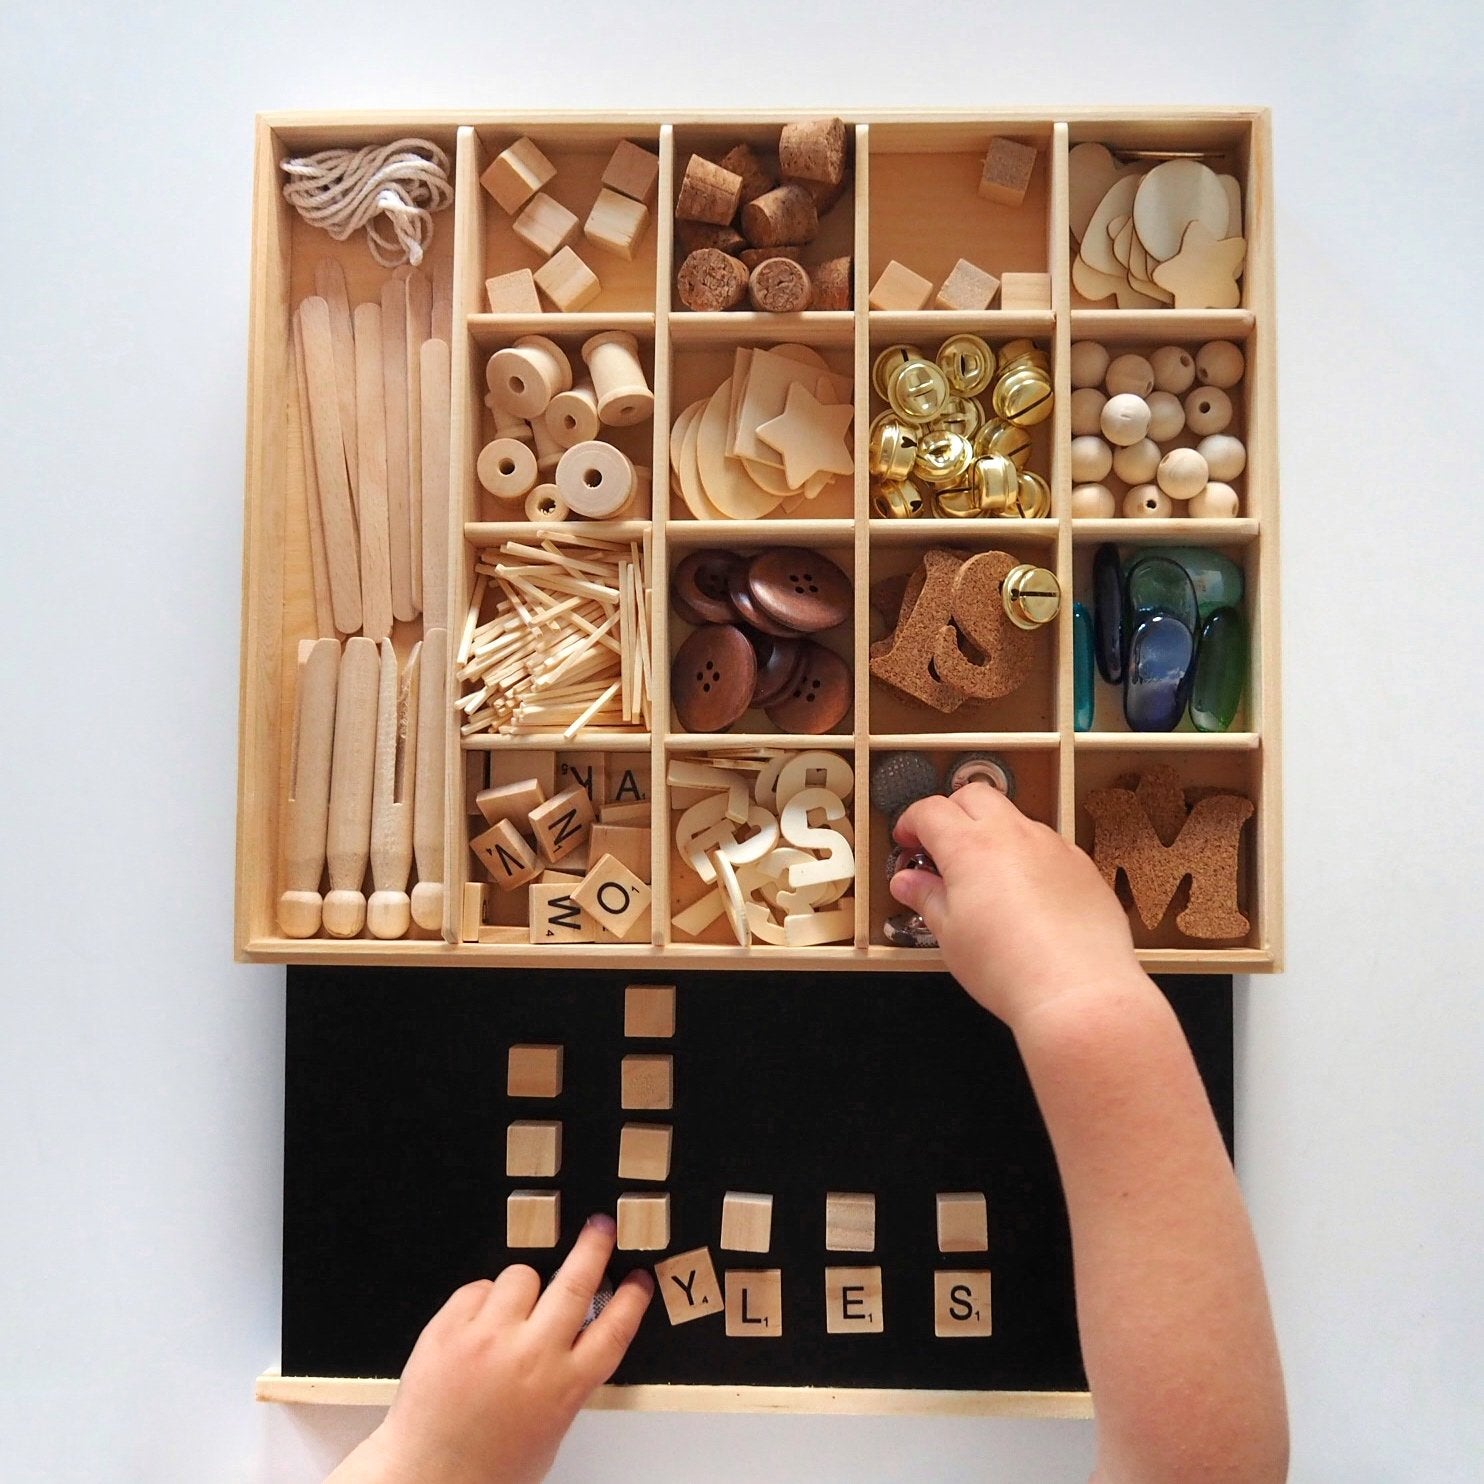 Why is classifying and sorting important for young children?